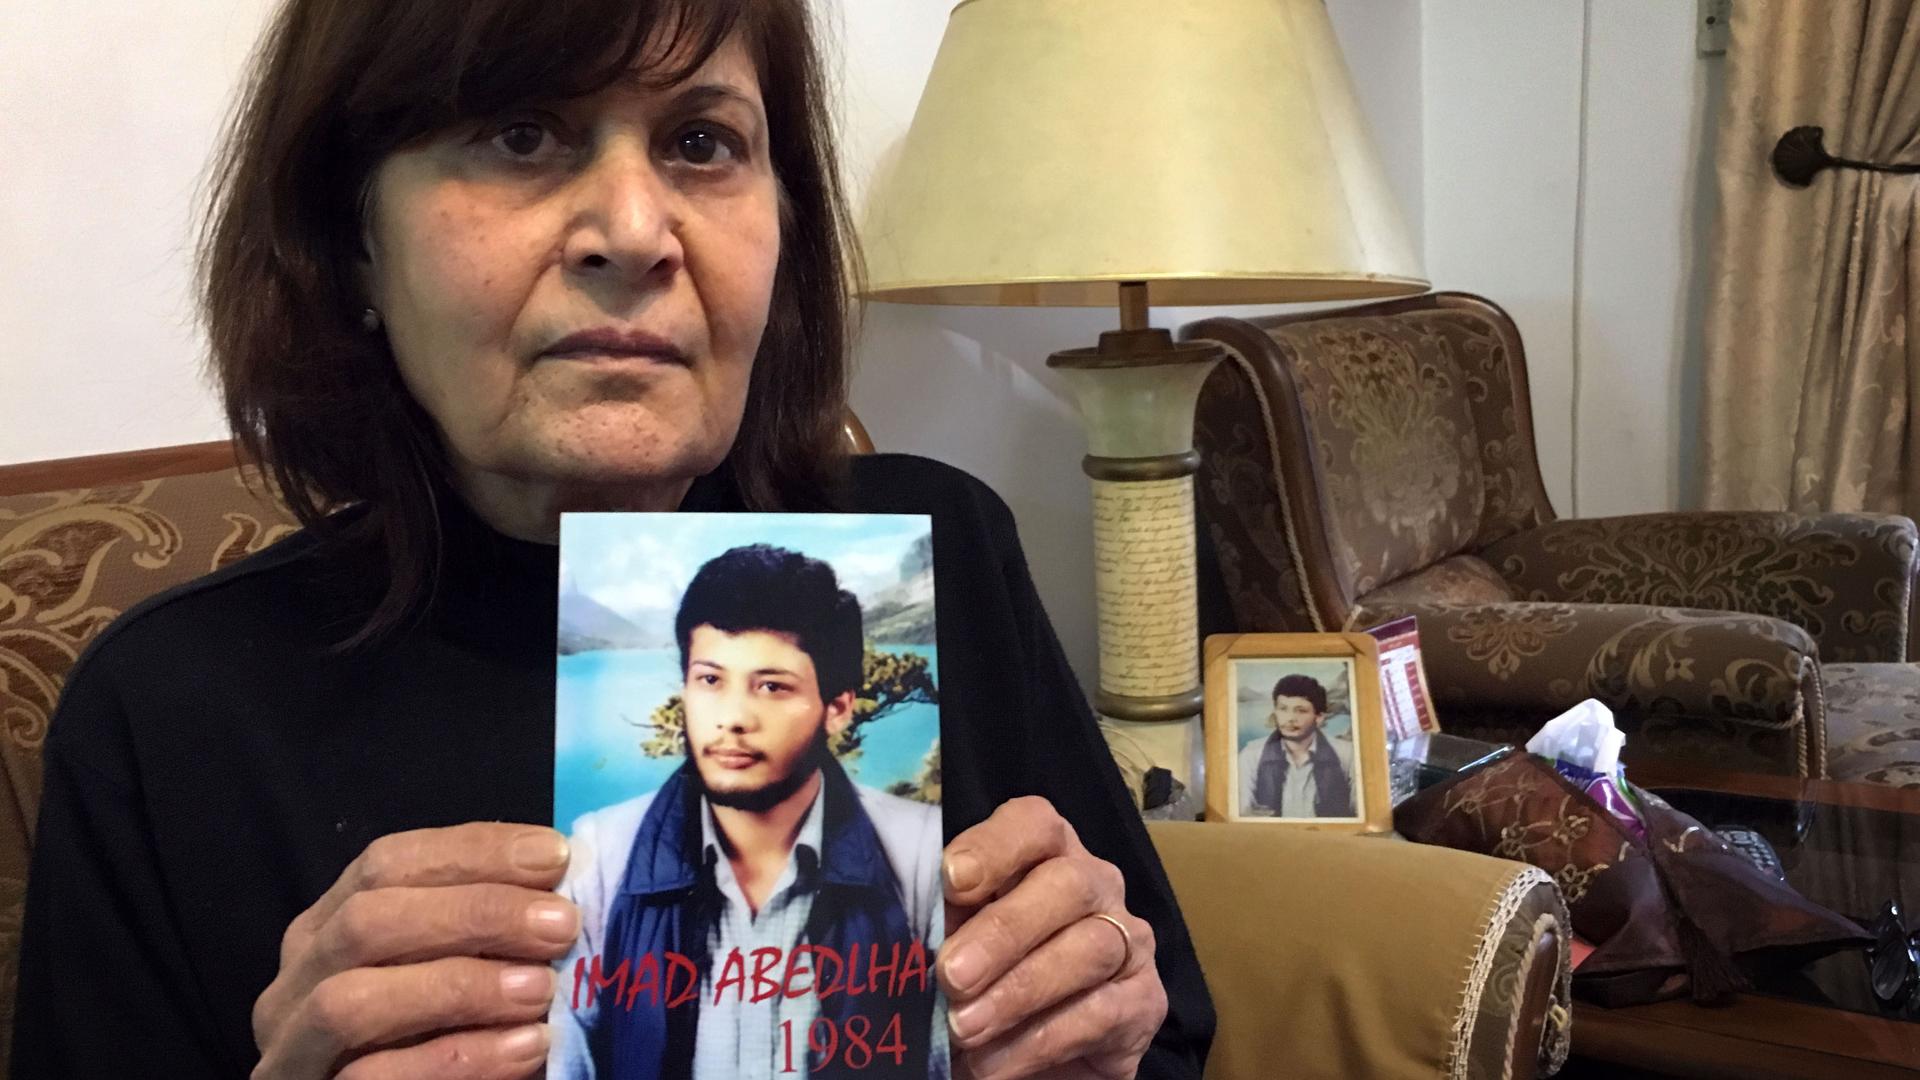 Samia Abdullah holds up a picture of her brother Emad who disappeared in 1984 when he was 20 years old. His family thinks he's still alive in a Syrian prison.